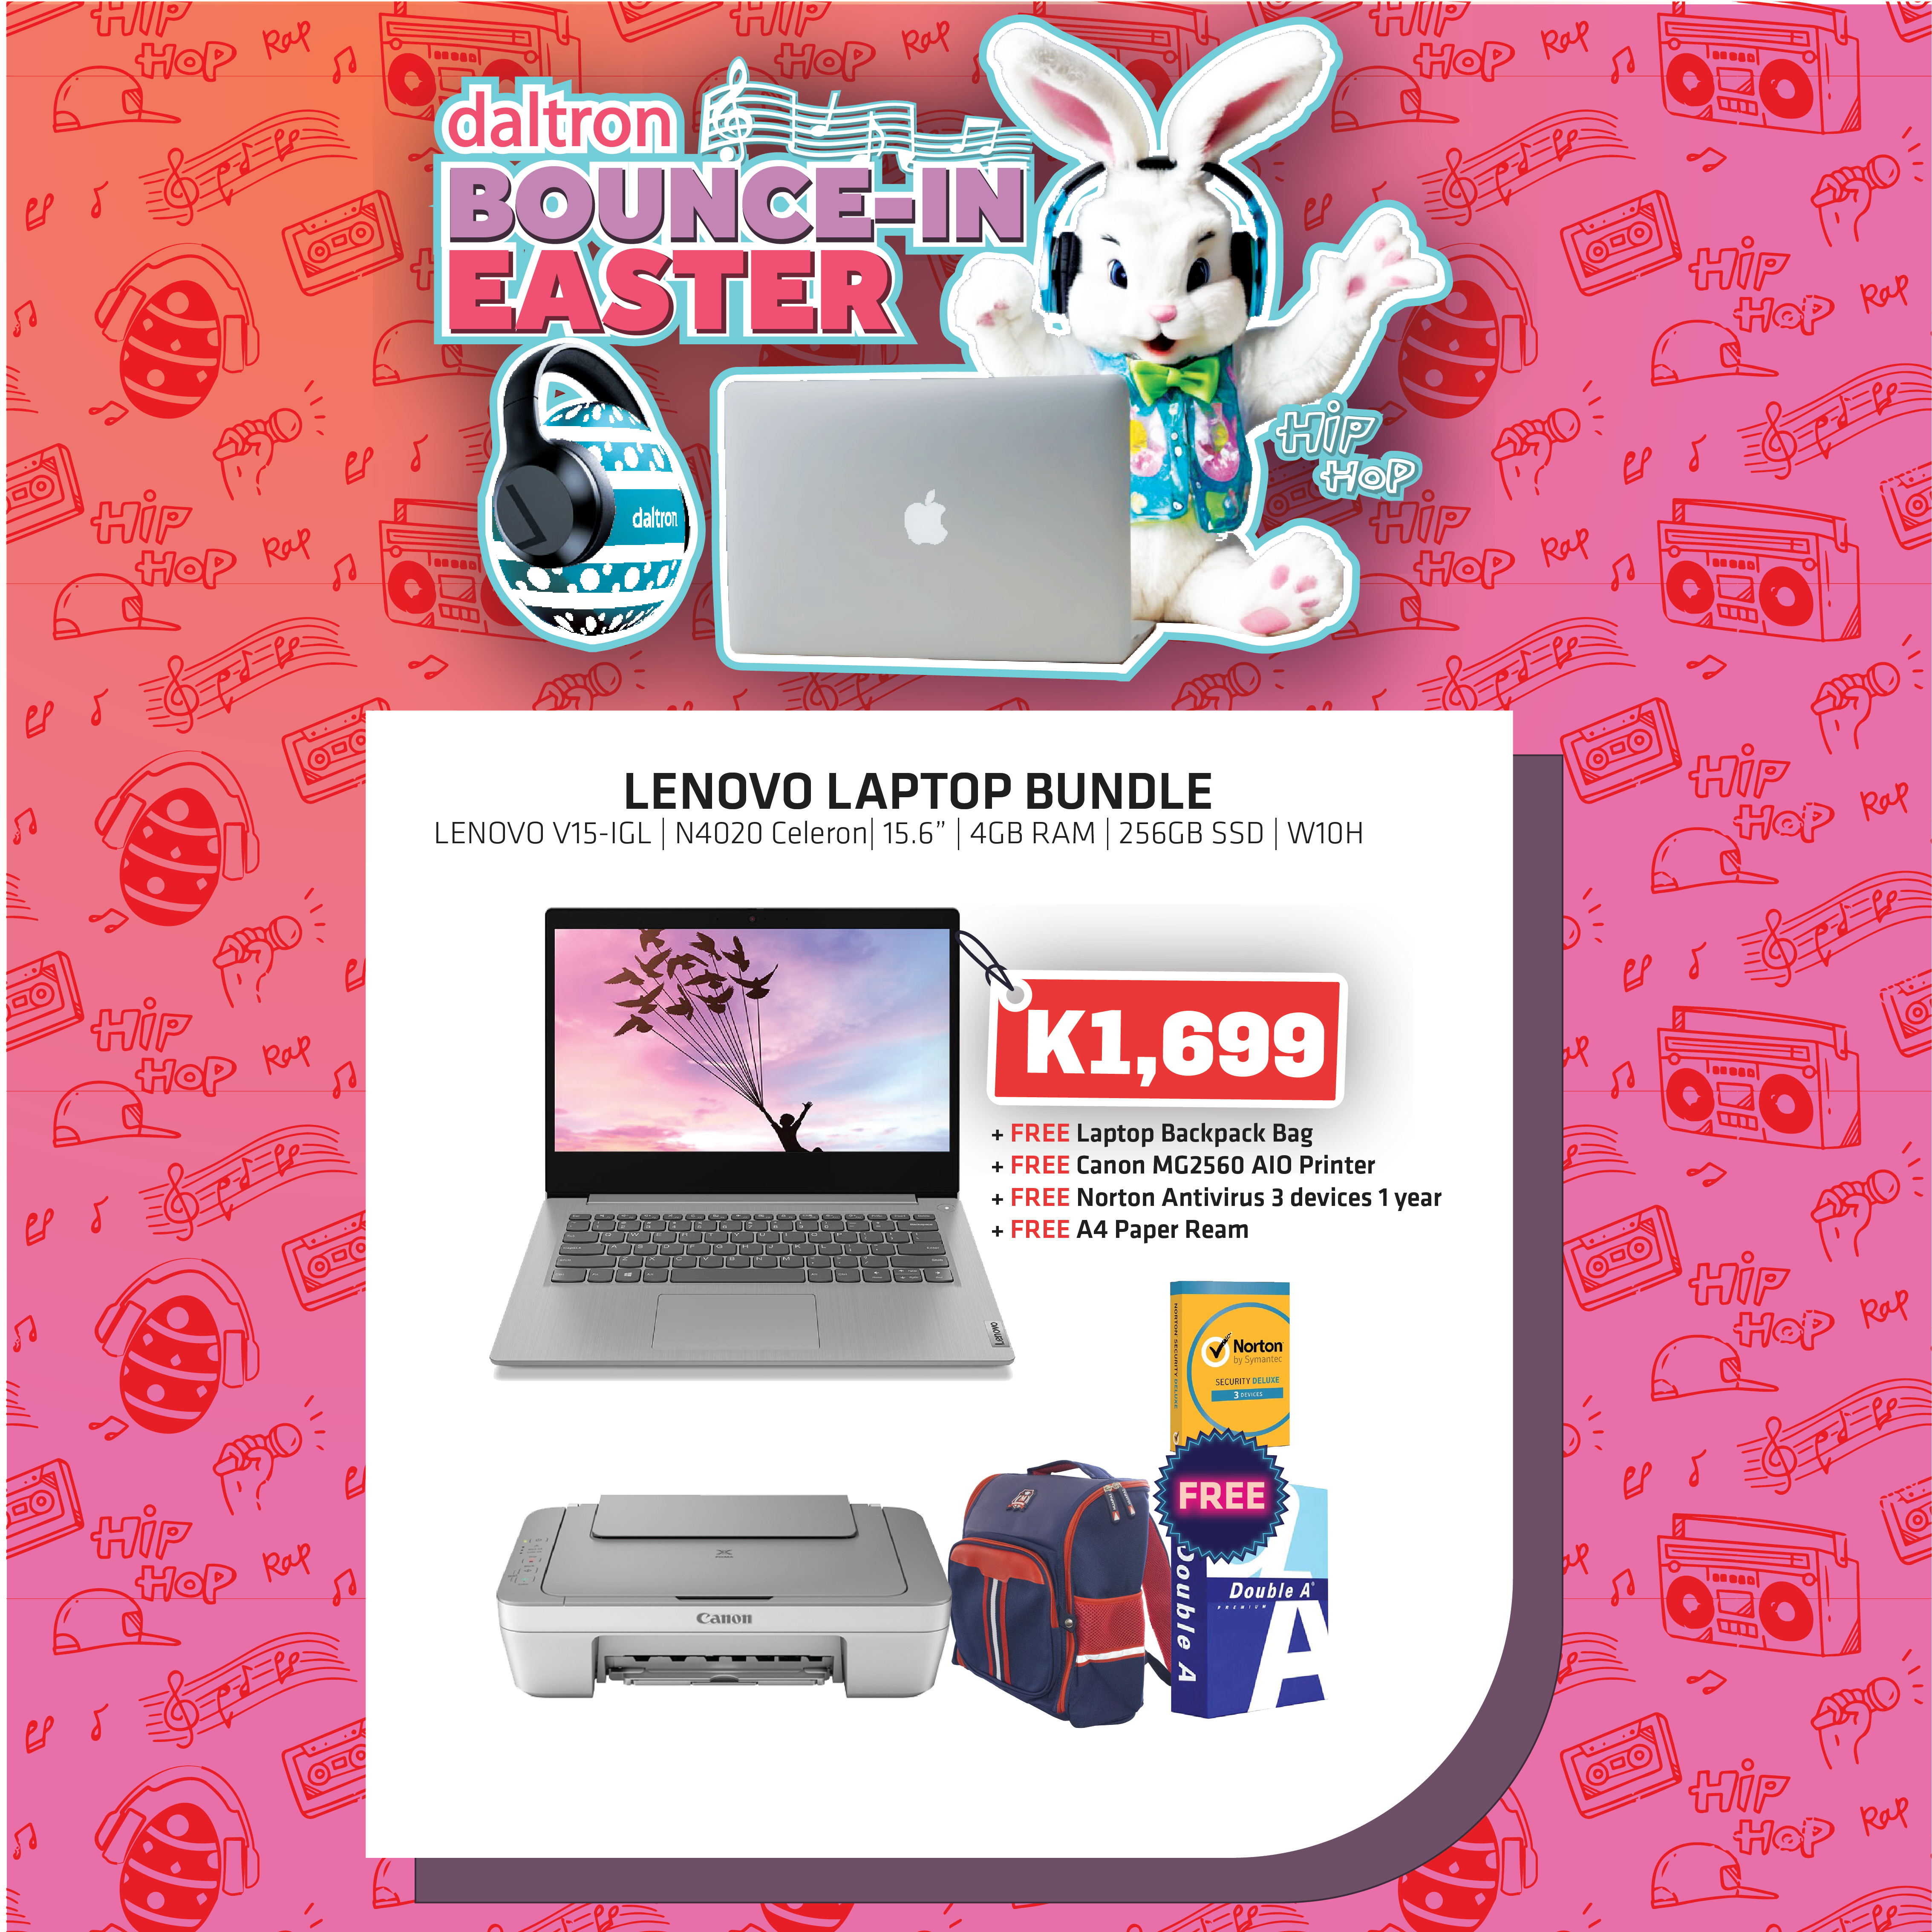 DAL_March Easter Specials_Web Posters-01